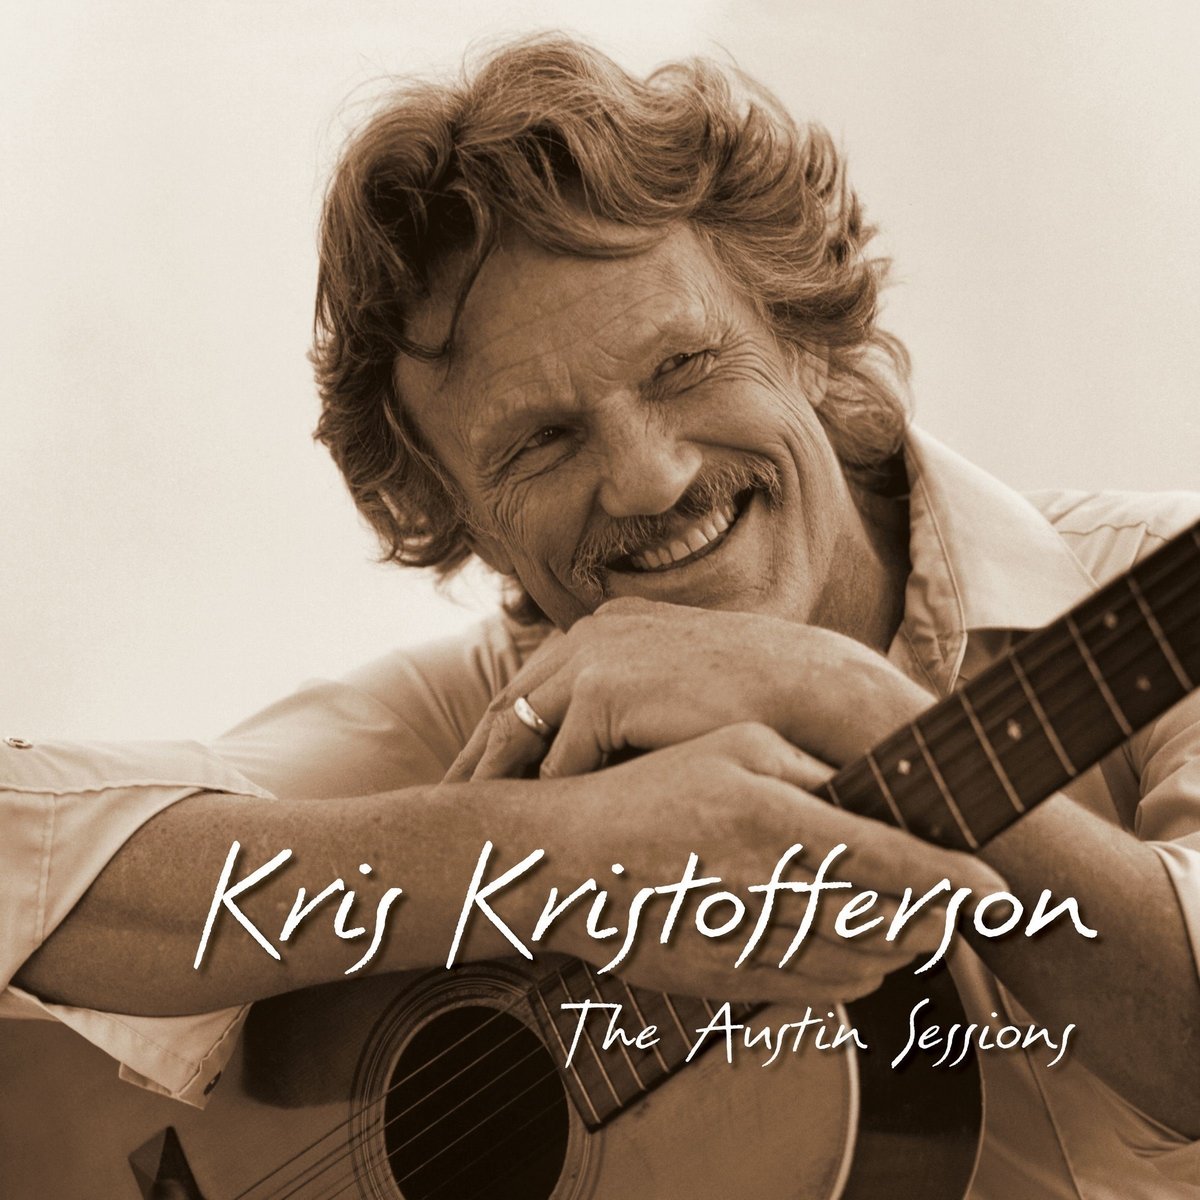 Kris Kristofferson - The Austin Sessions (Expanded Edition) (2017) 24bit FLAC Download